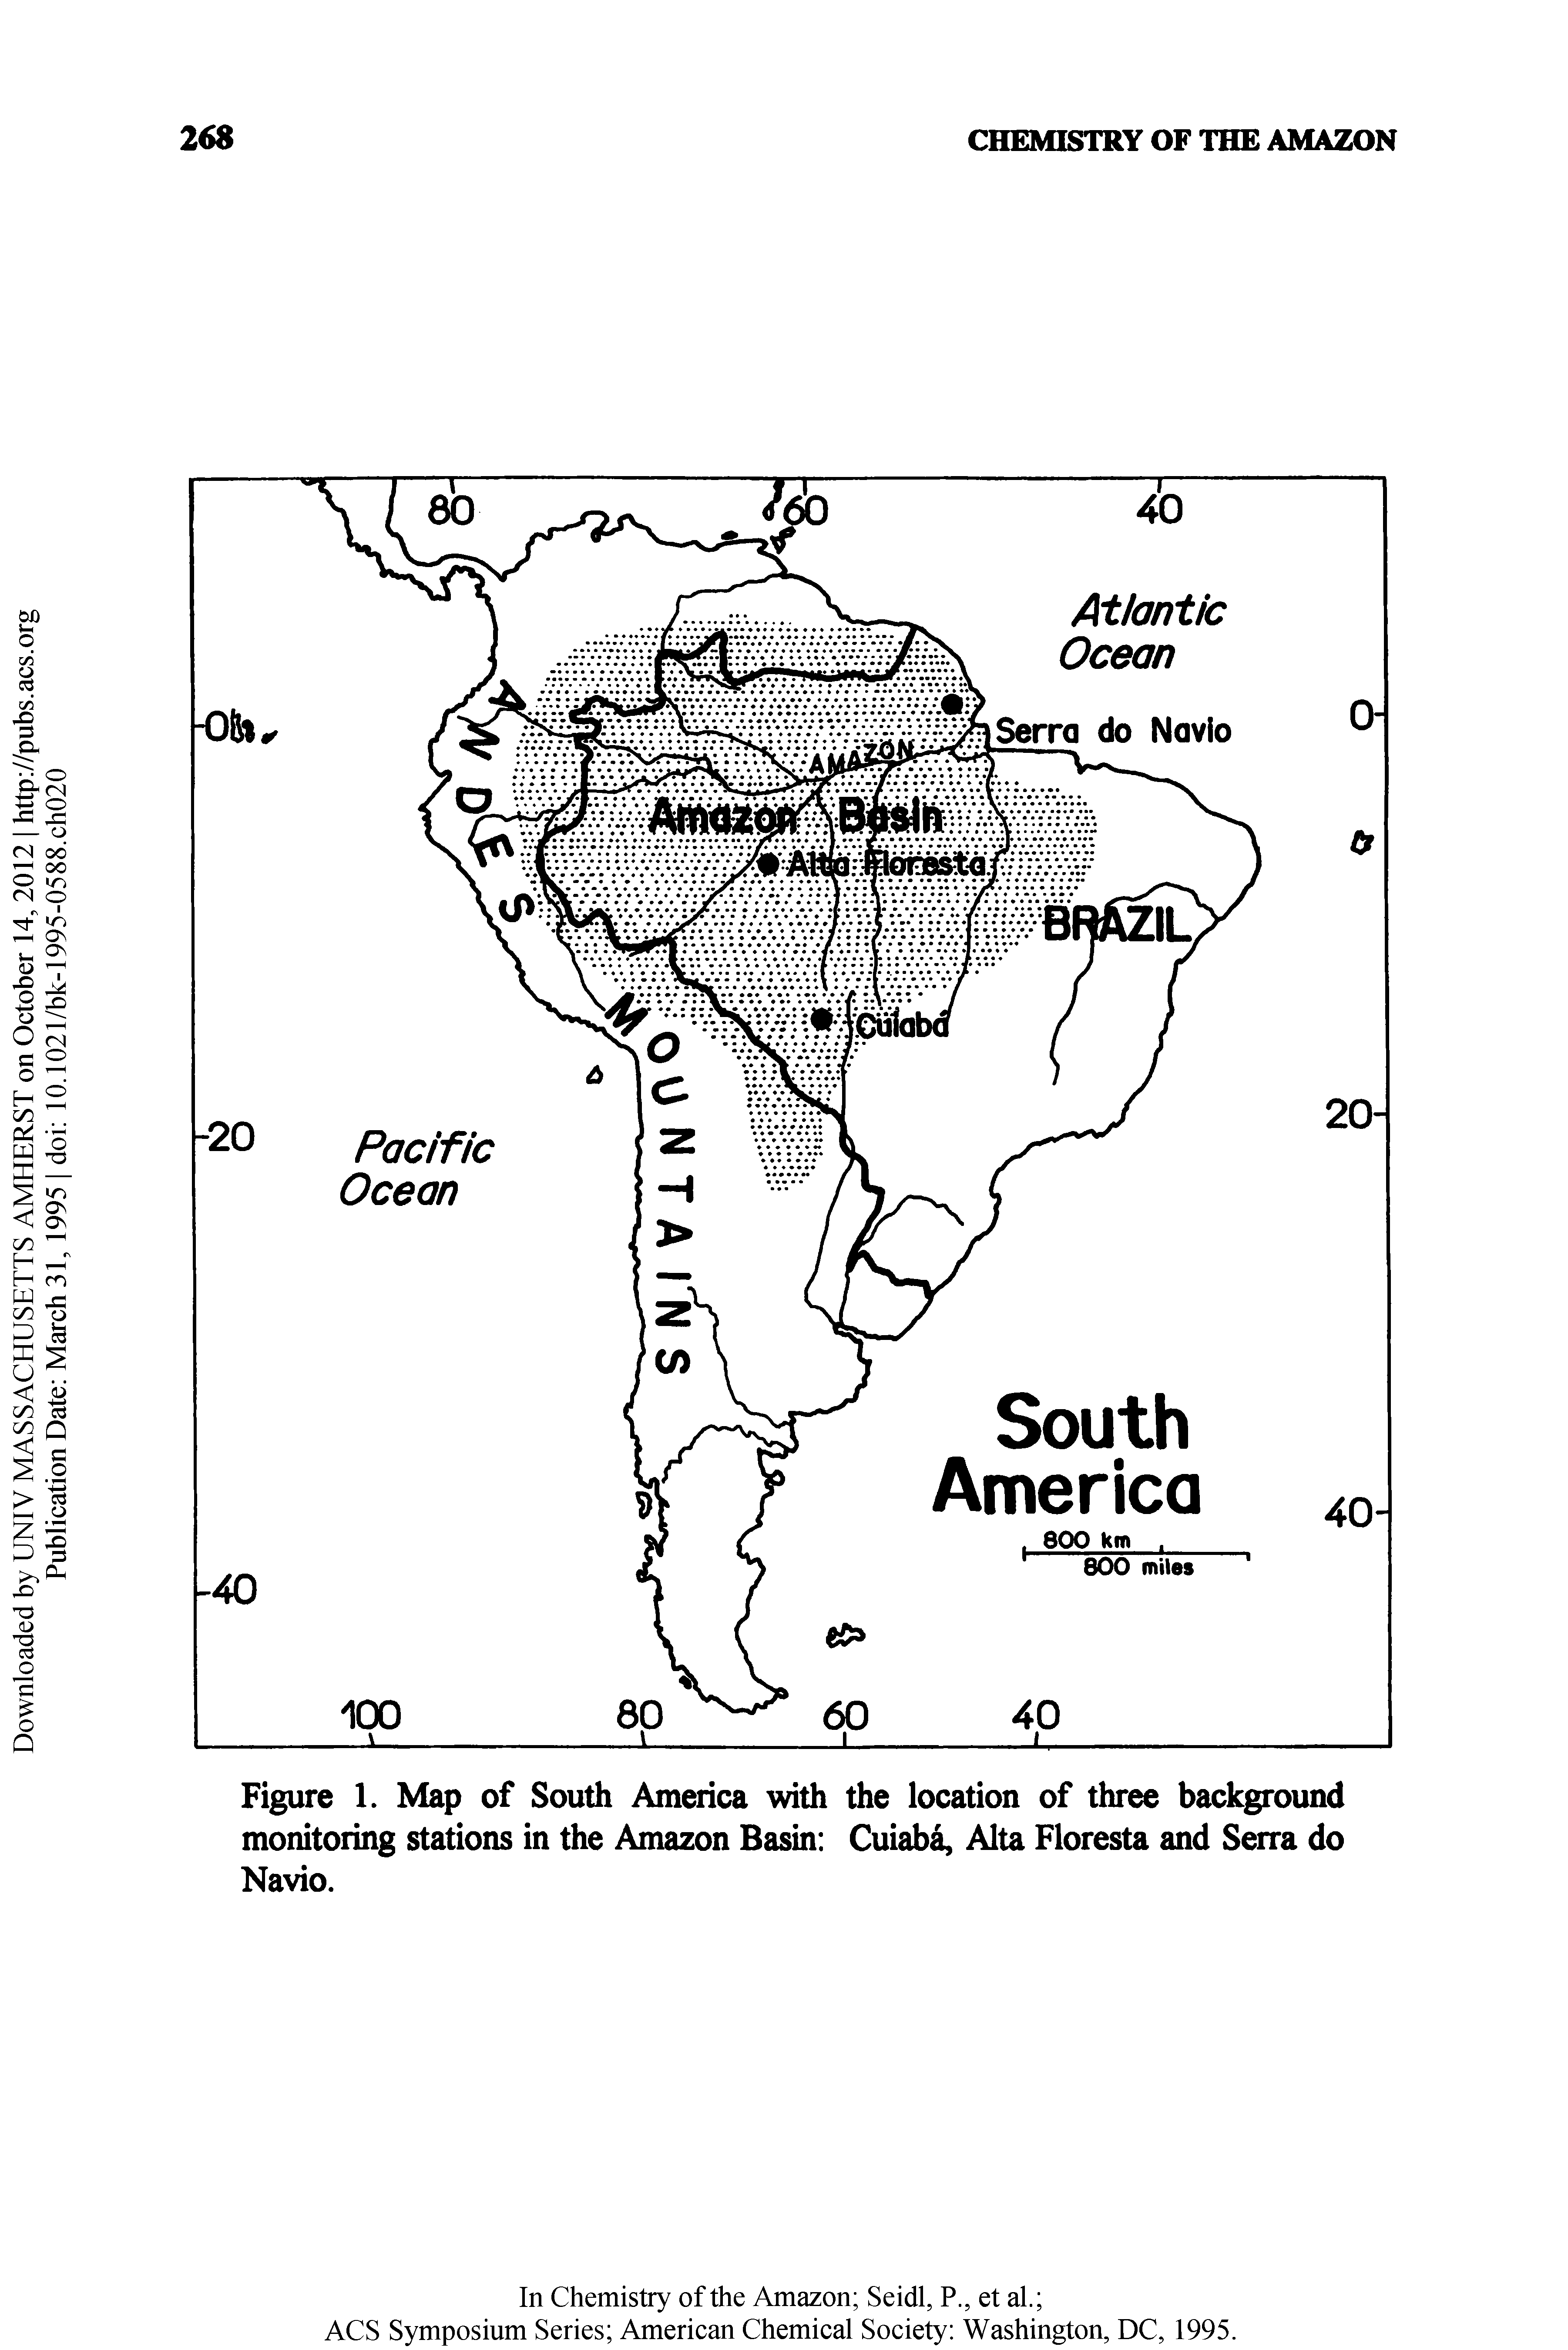 Figure 1. Map of South America with the location of three background monitoring stations in the Amazon Basin Cuiaba, Alta Floresta and Serra do Navio.